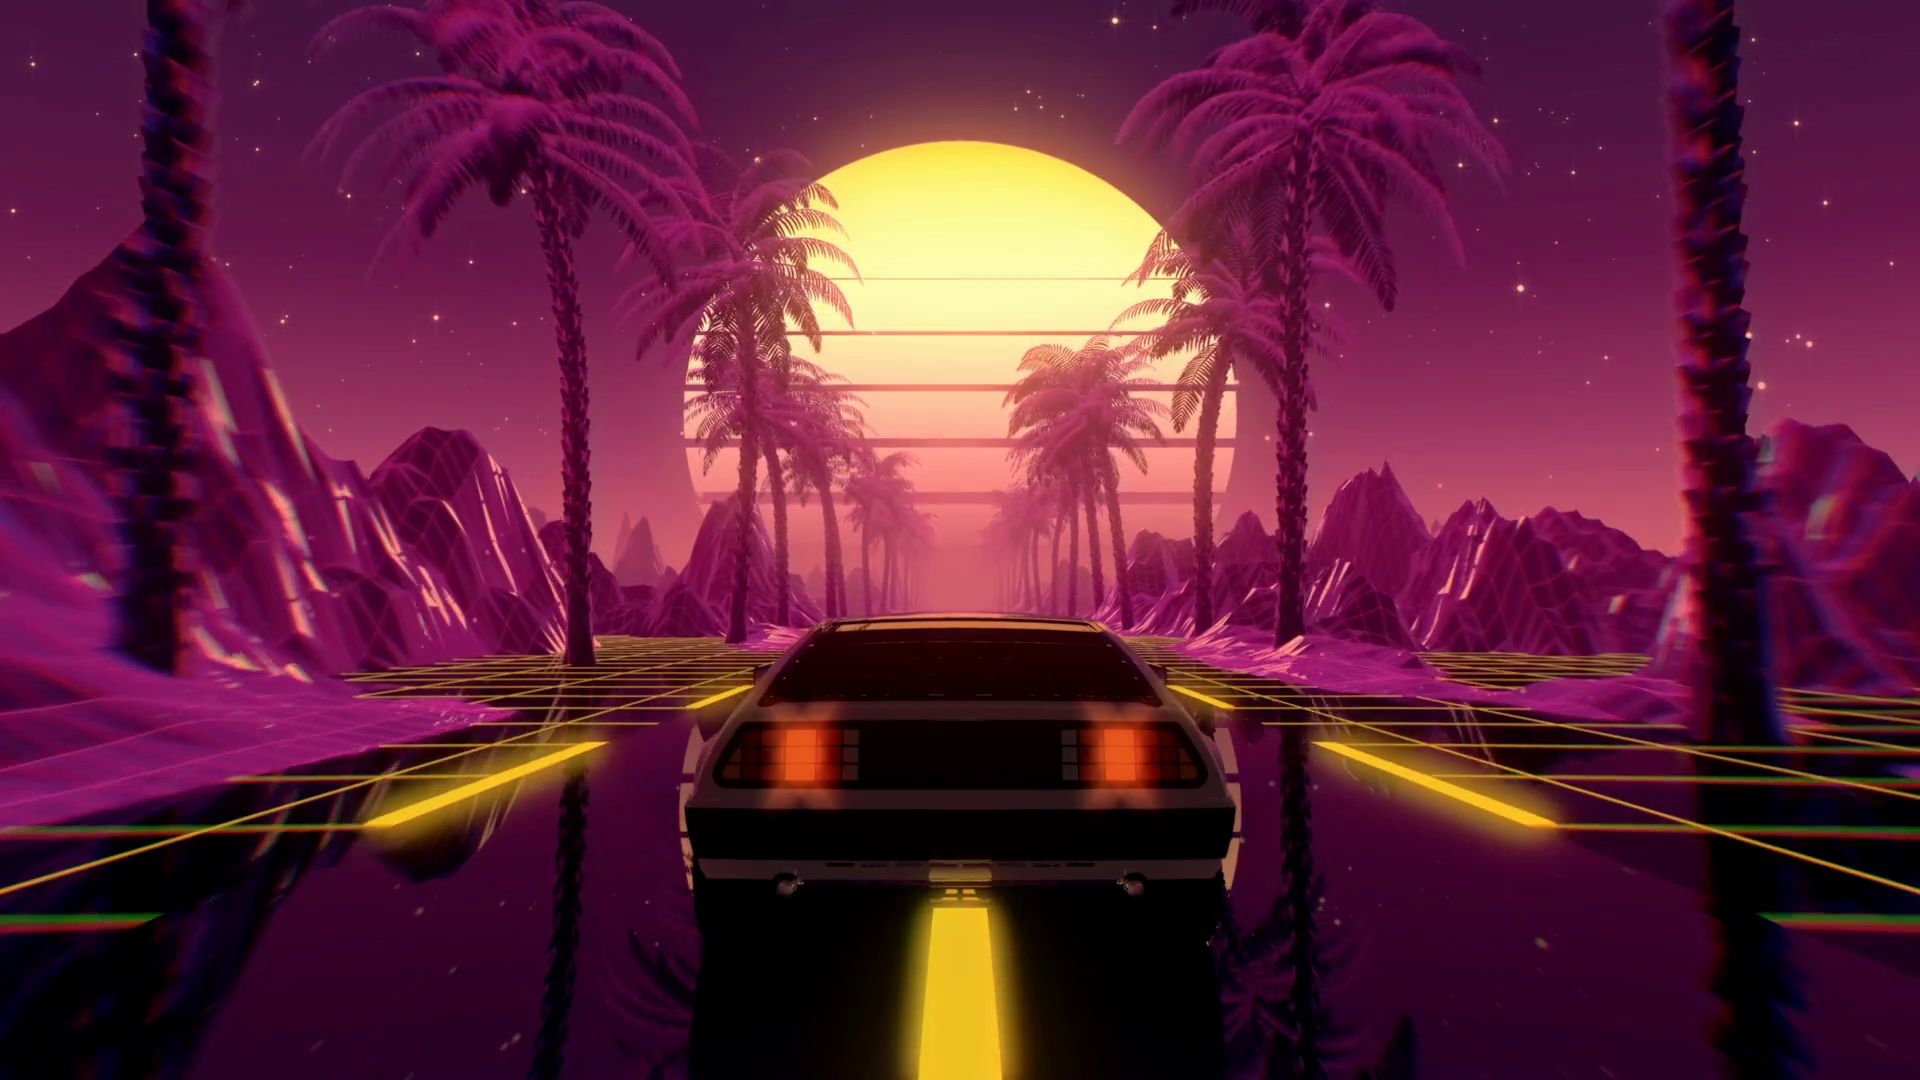 80s Retro Futuristic Sci Fi Seamless Loop With Vintage Car. Riding In Retrowave VJ Videogame Landscape, Neon Lights And Low Poly Grid. Stylized Cyberpunk Vaporwave 3D Animation Background. 4K Motion Background